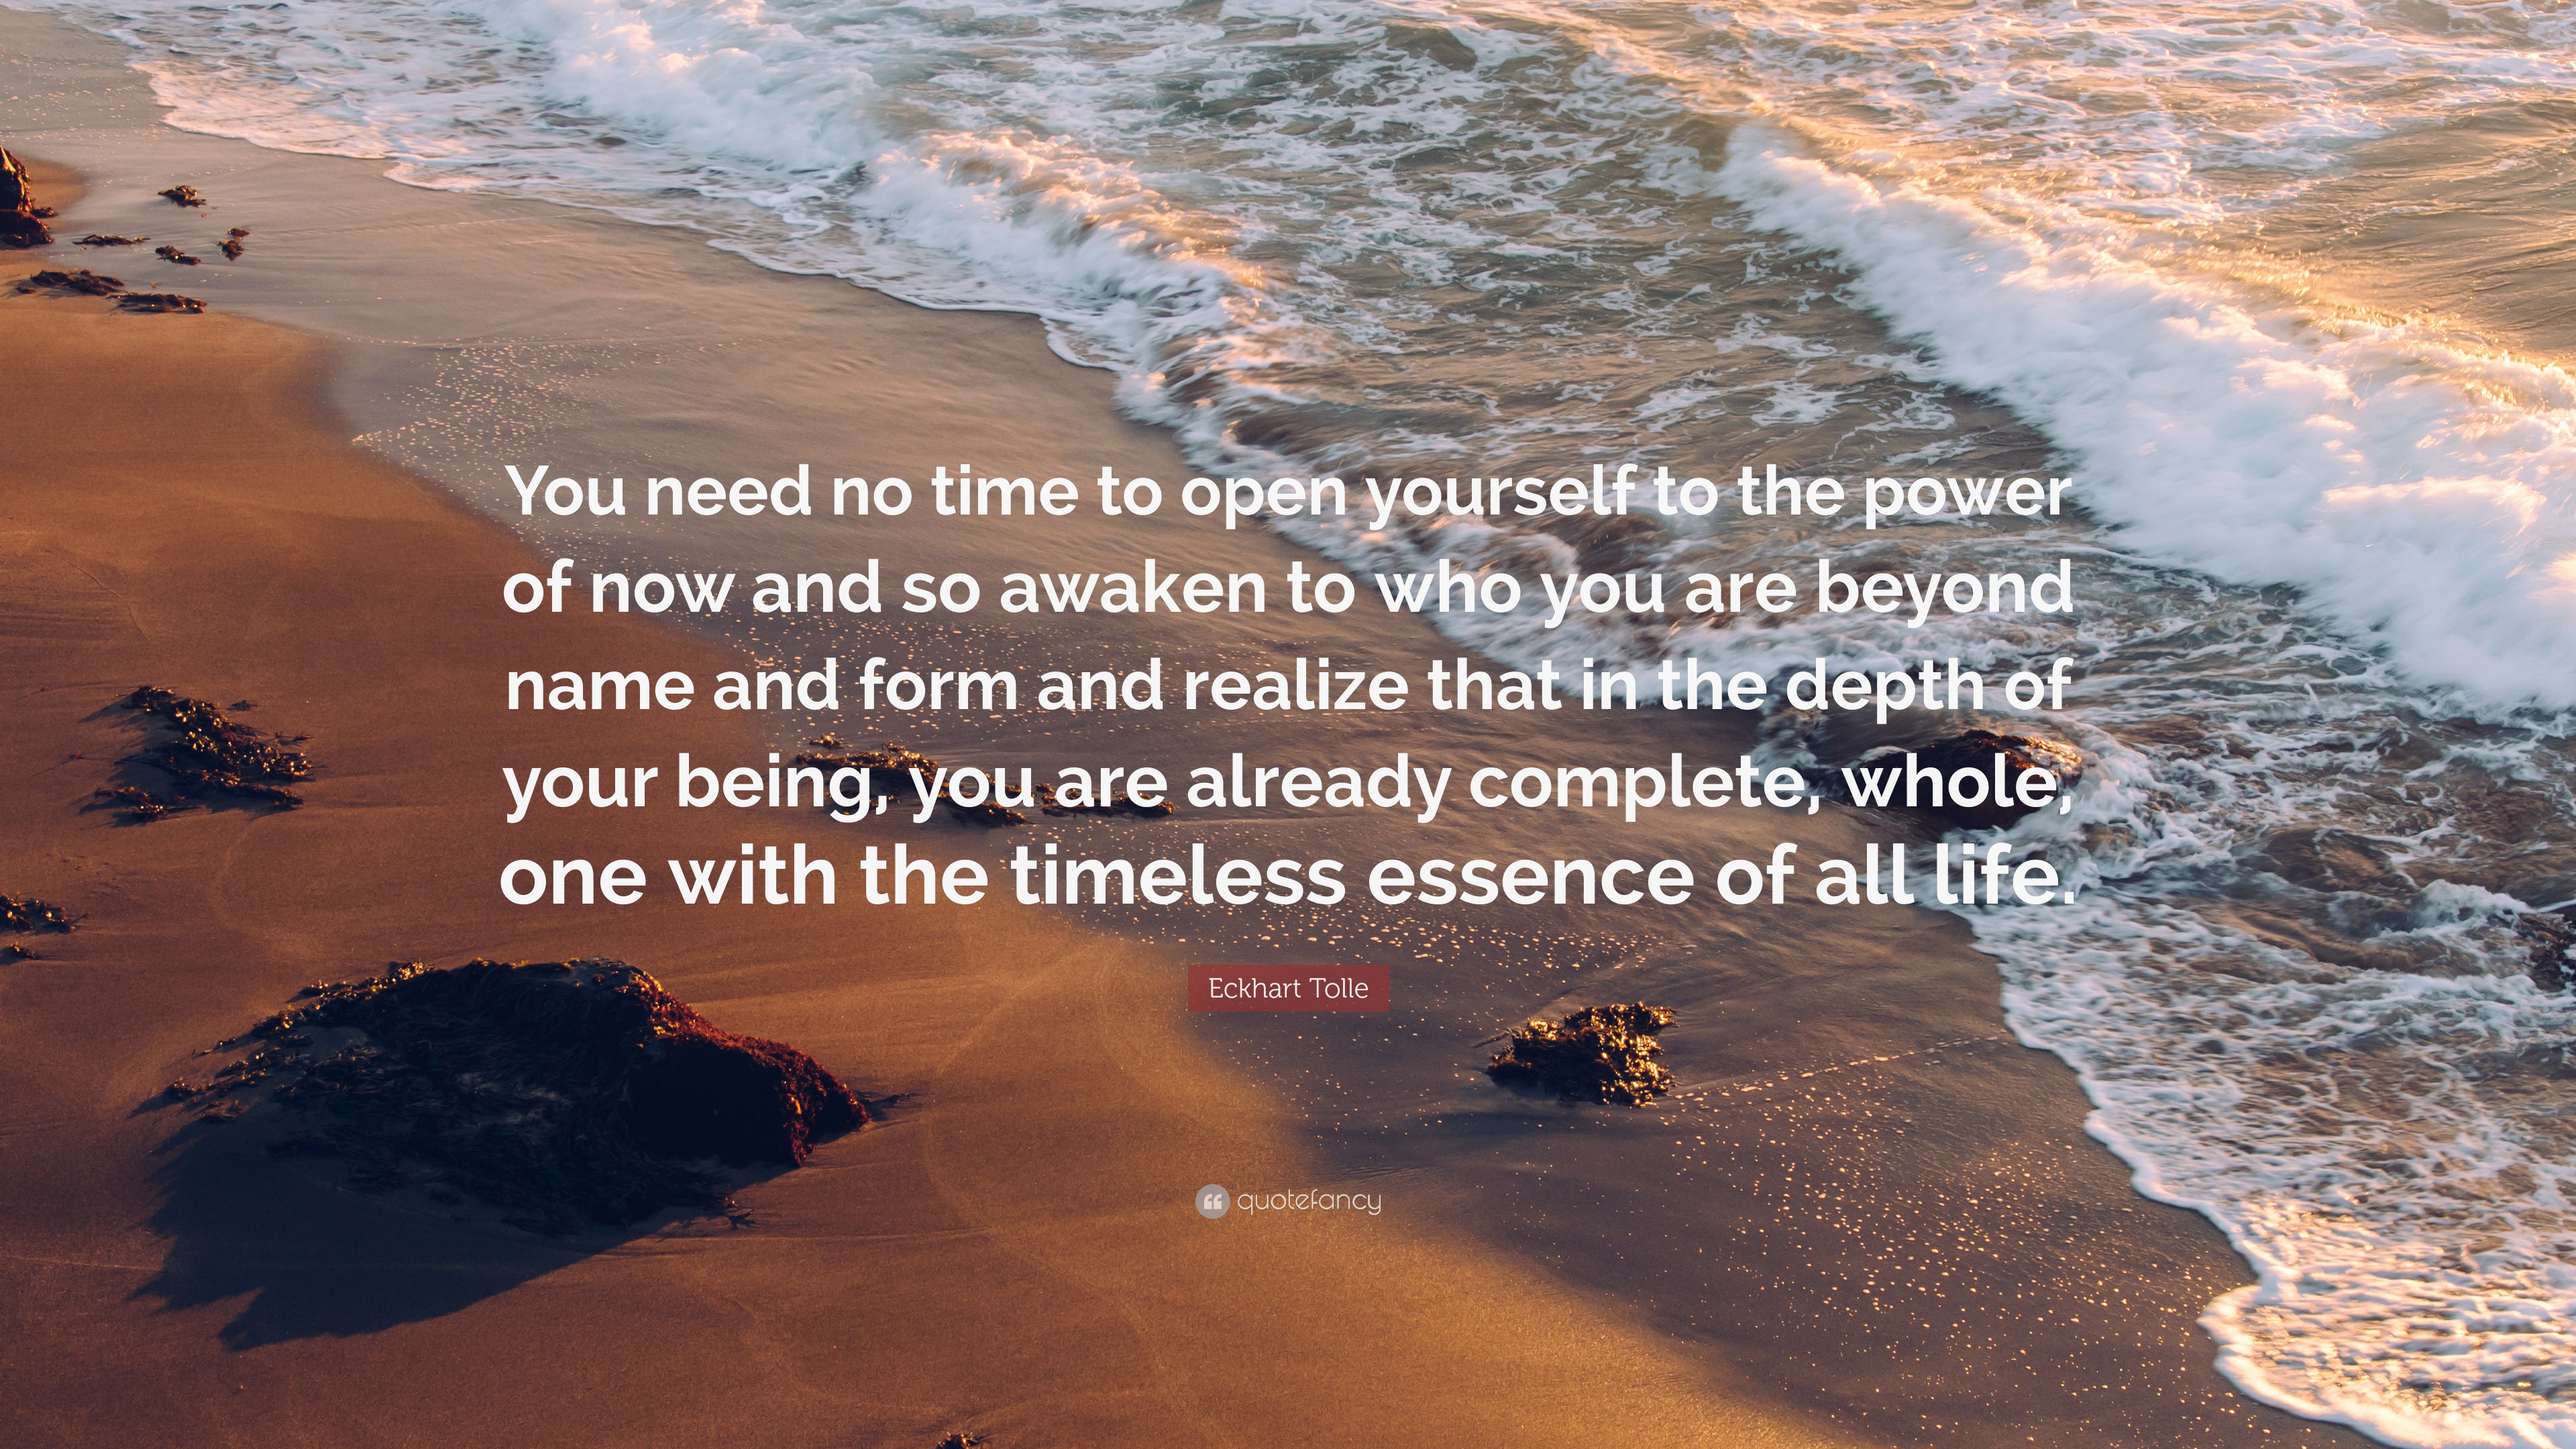 Eckhart Tolle Quote “You need no time to open yourself to